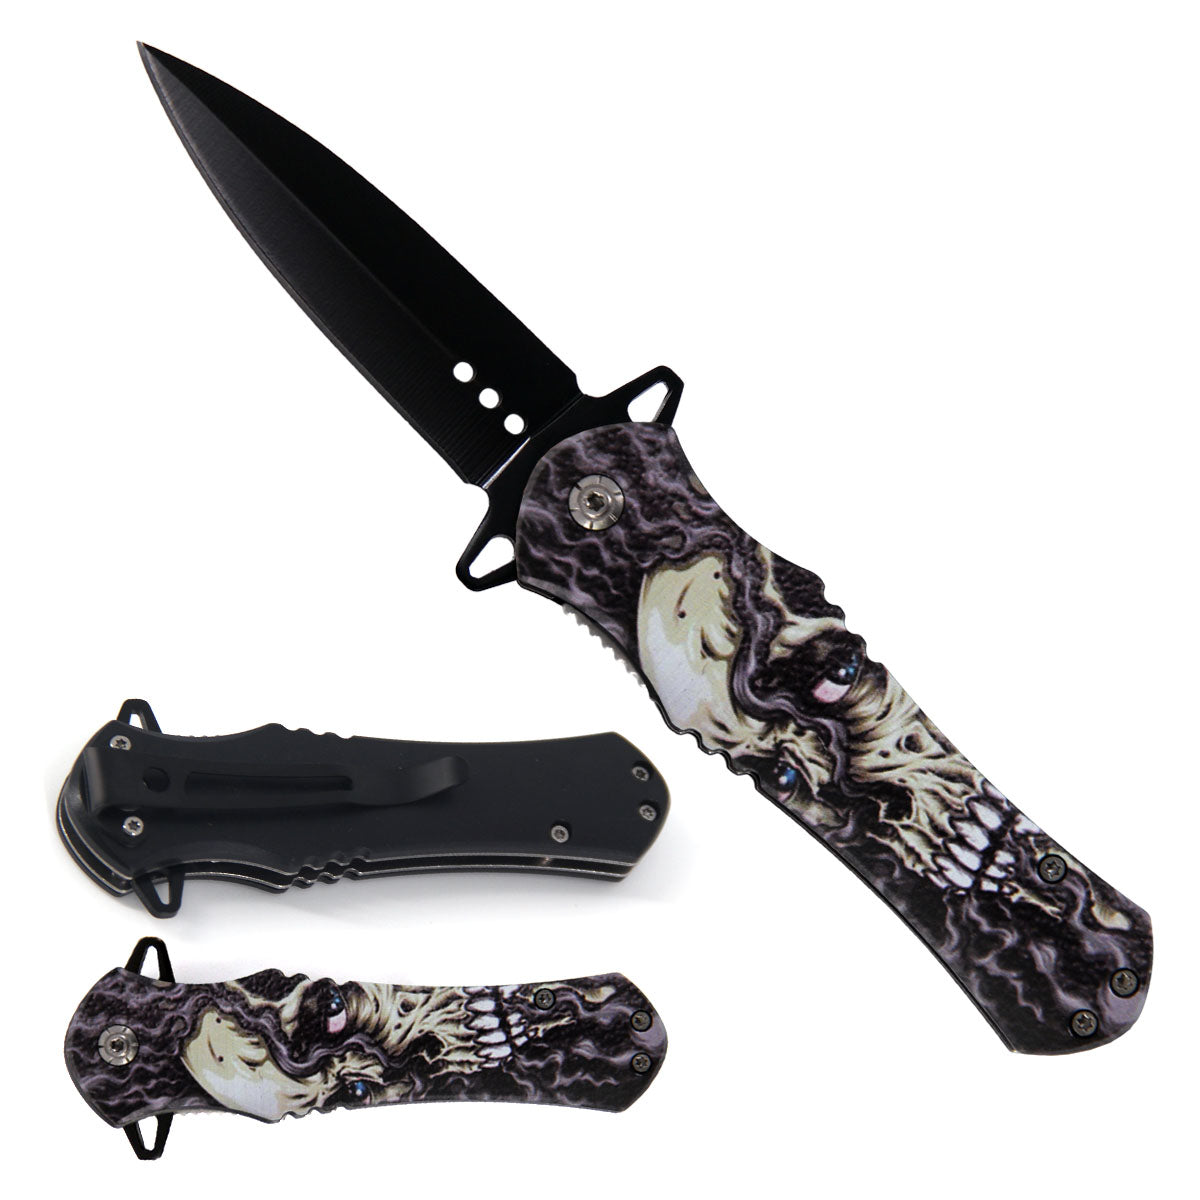 4.63" Smoking Skull Print Handle Assist-Open Spear Point Blade Folding Knife with Pocket Clip